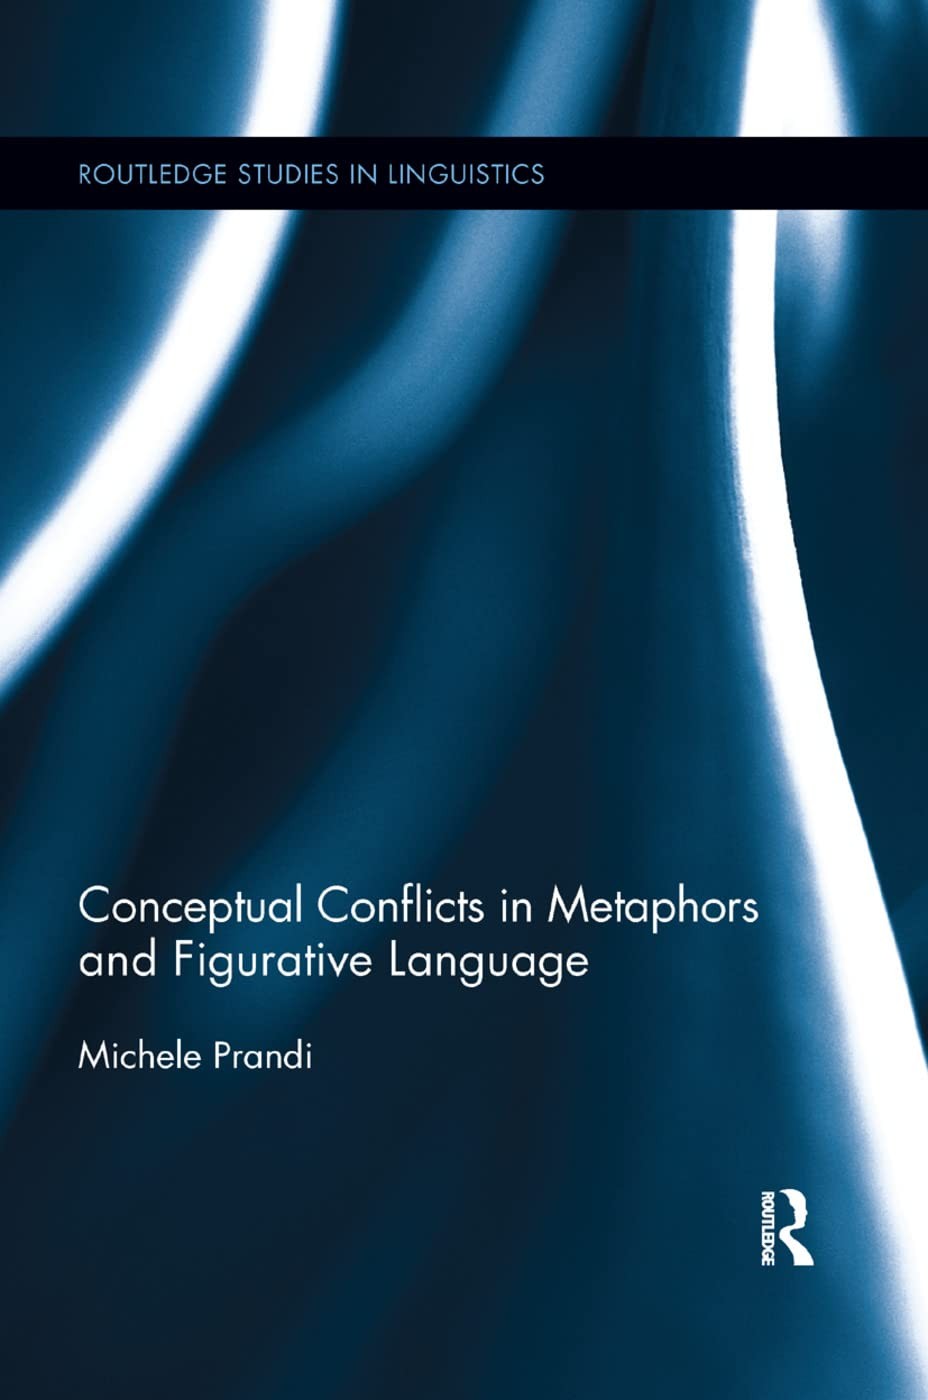 Conceptual Conflicts in Metaphors and Figurative Language